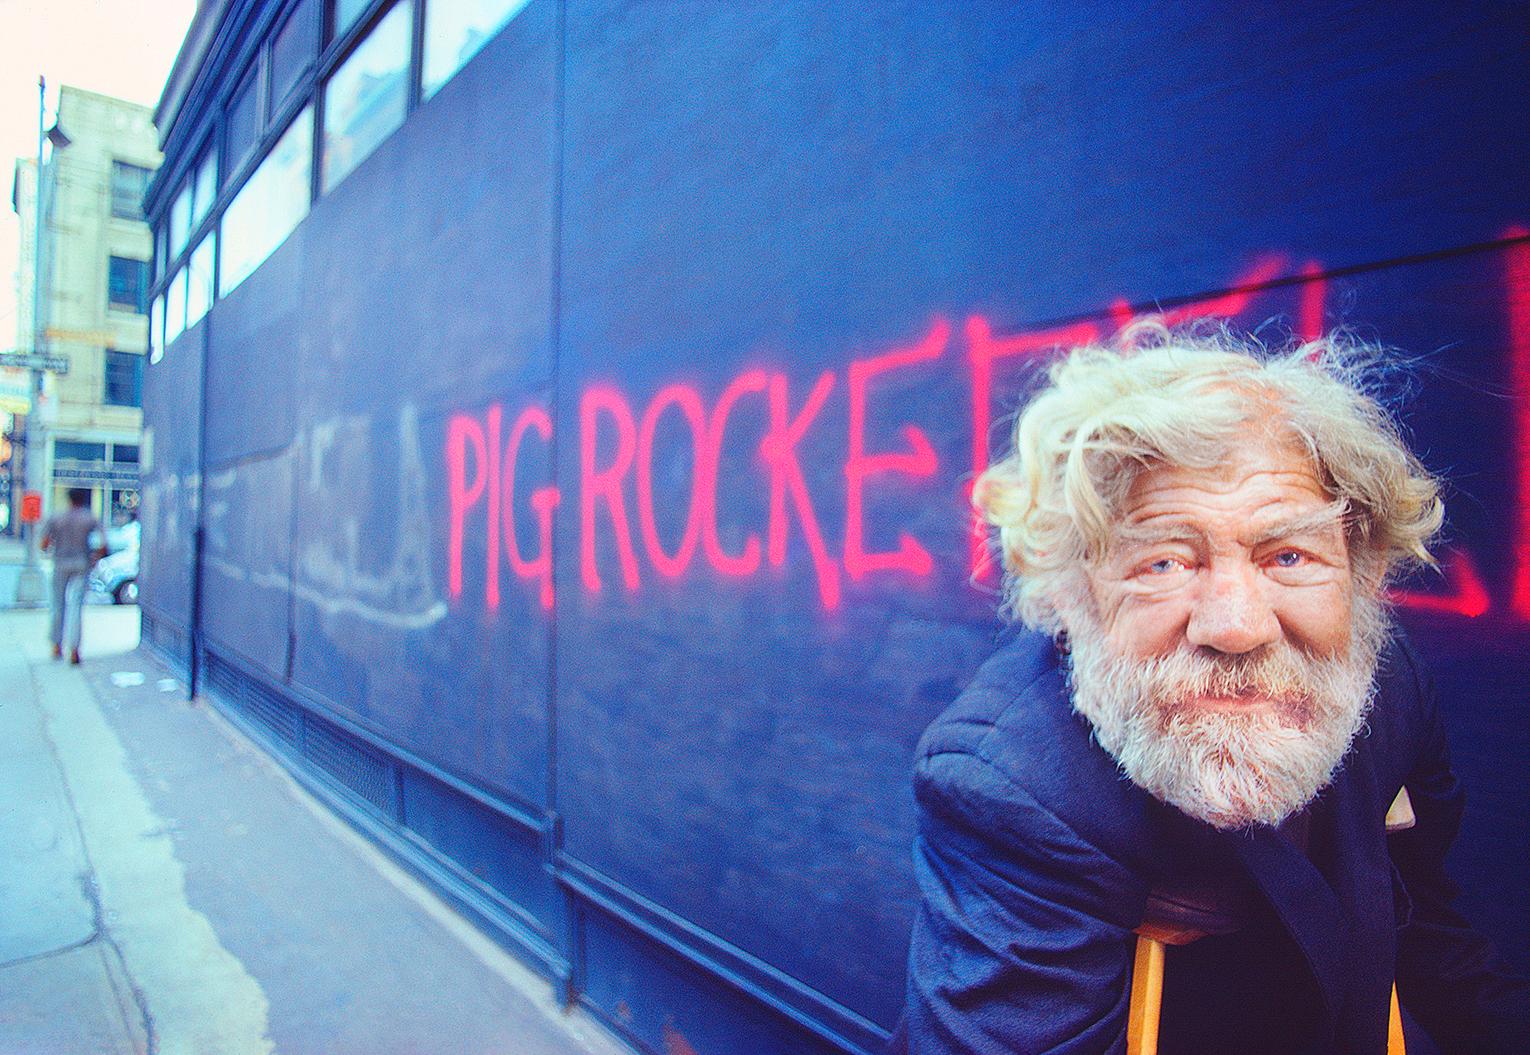 Mitchell Funk Portrait Photograph - Vagabond Vagrant  - Life on the Fringe in the  Bowery  - The Streets of New York